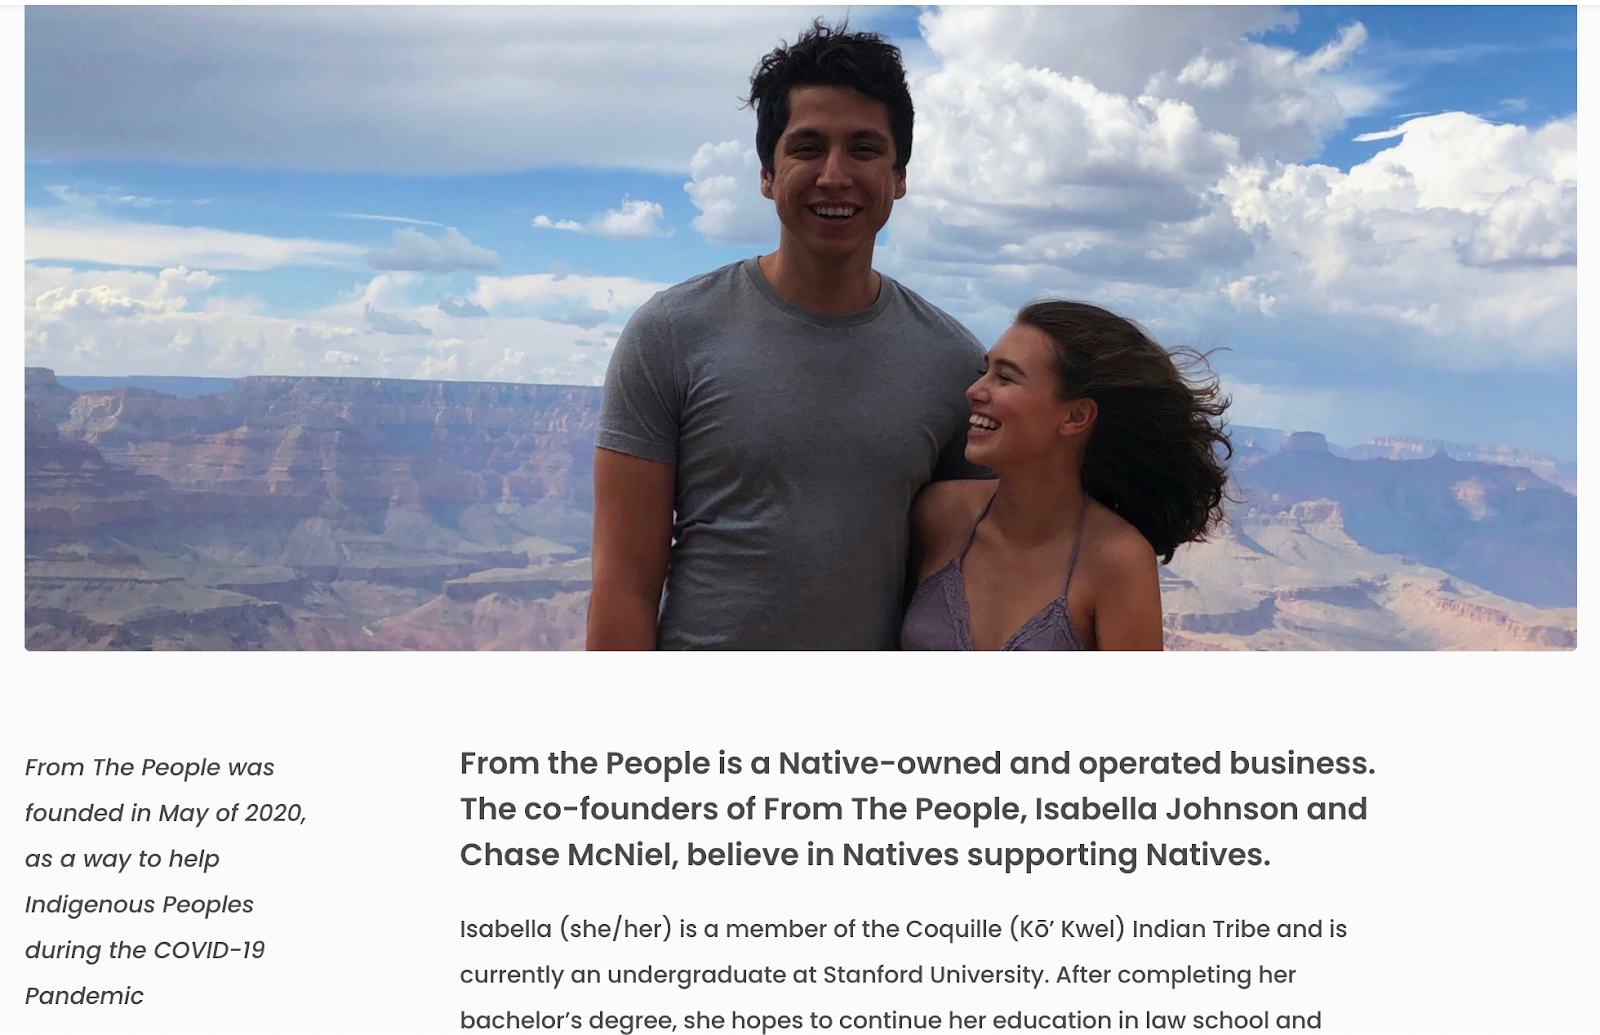 Screenshot of From The People Marketplace with a photo of founders and description of their mission.